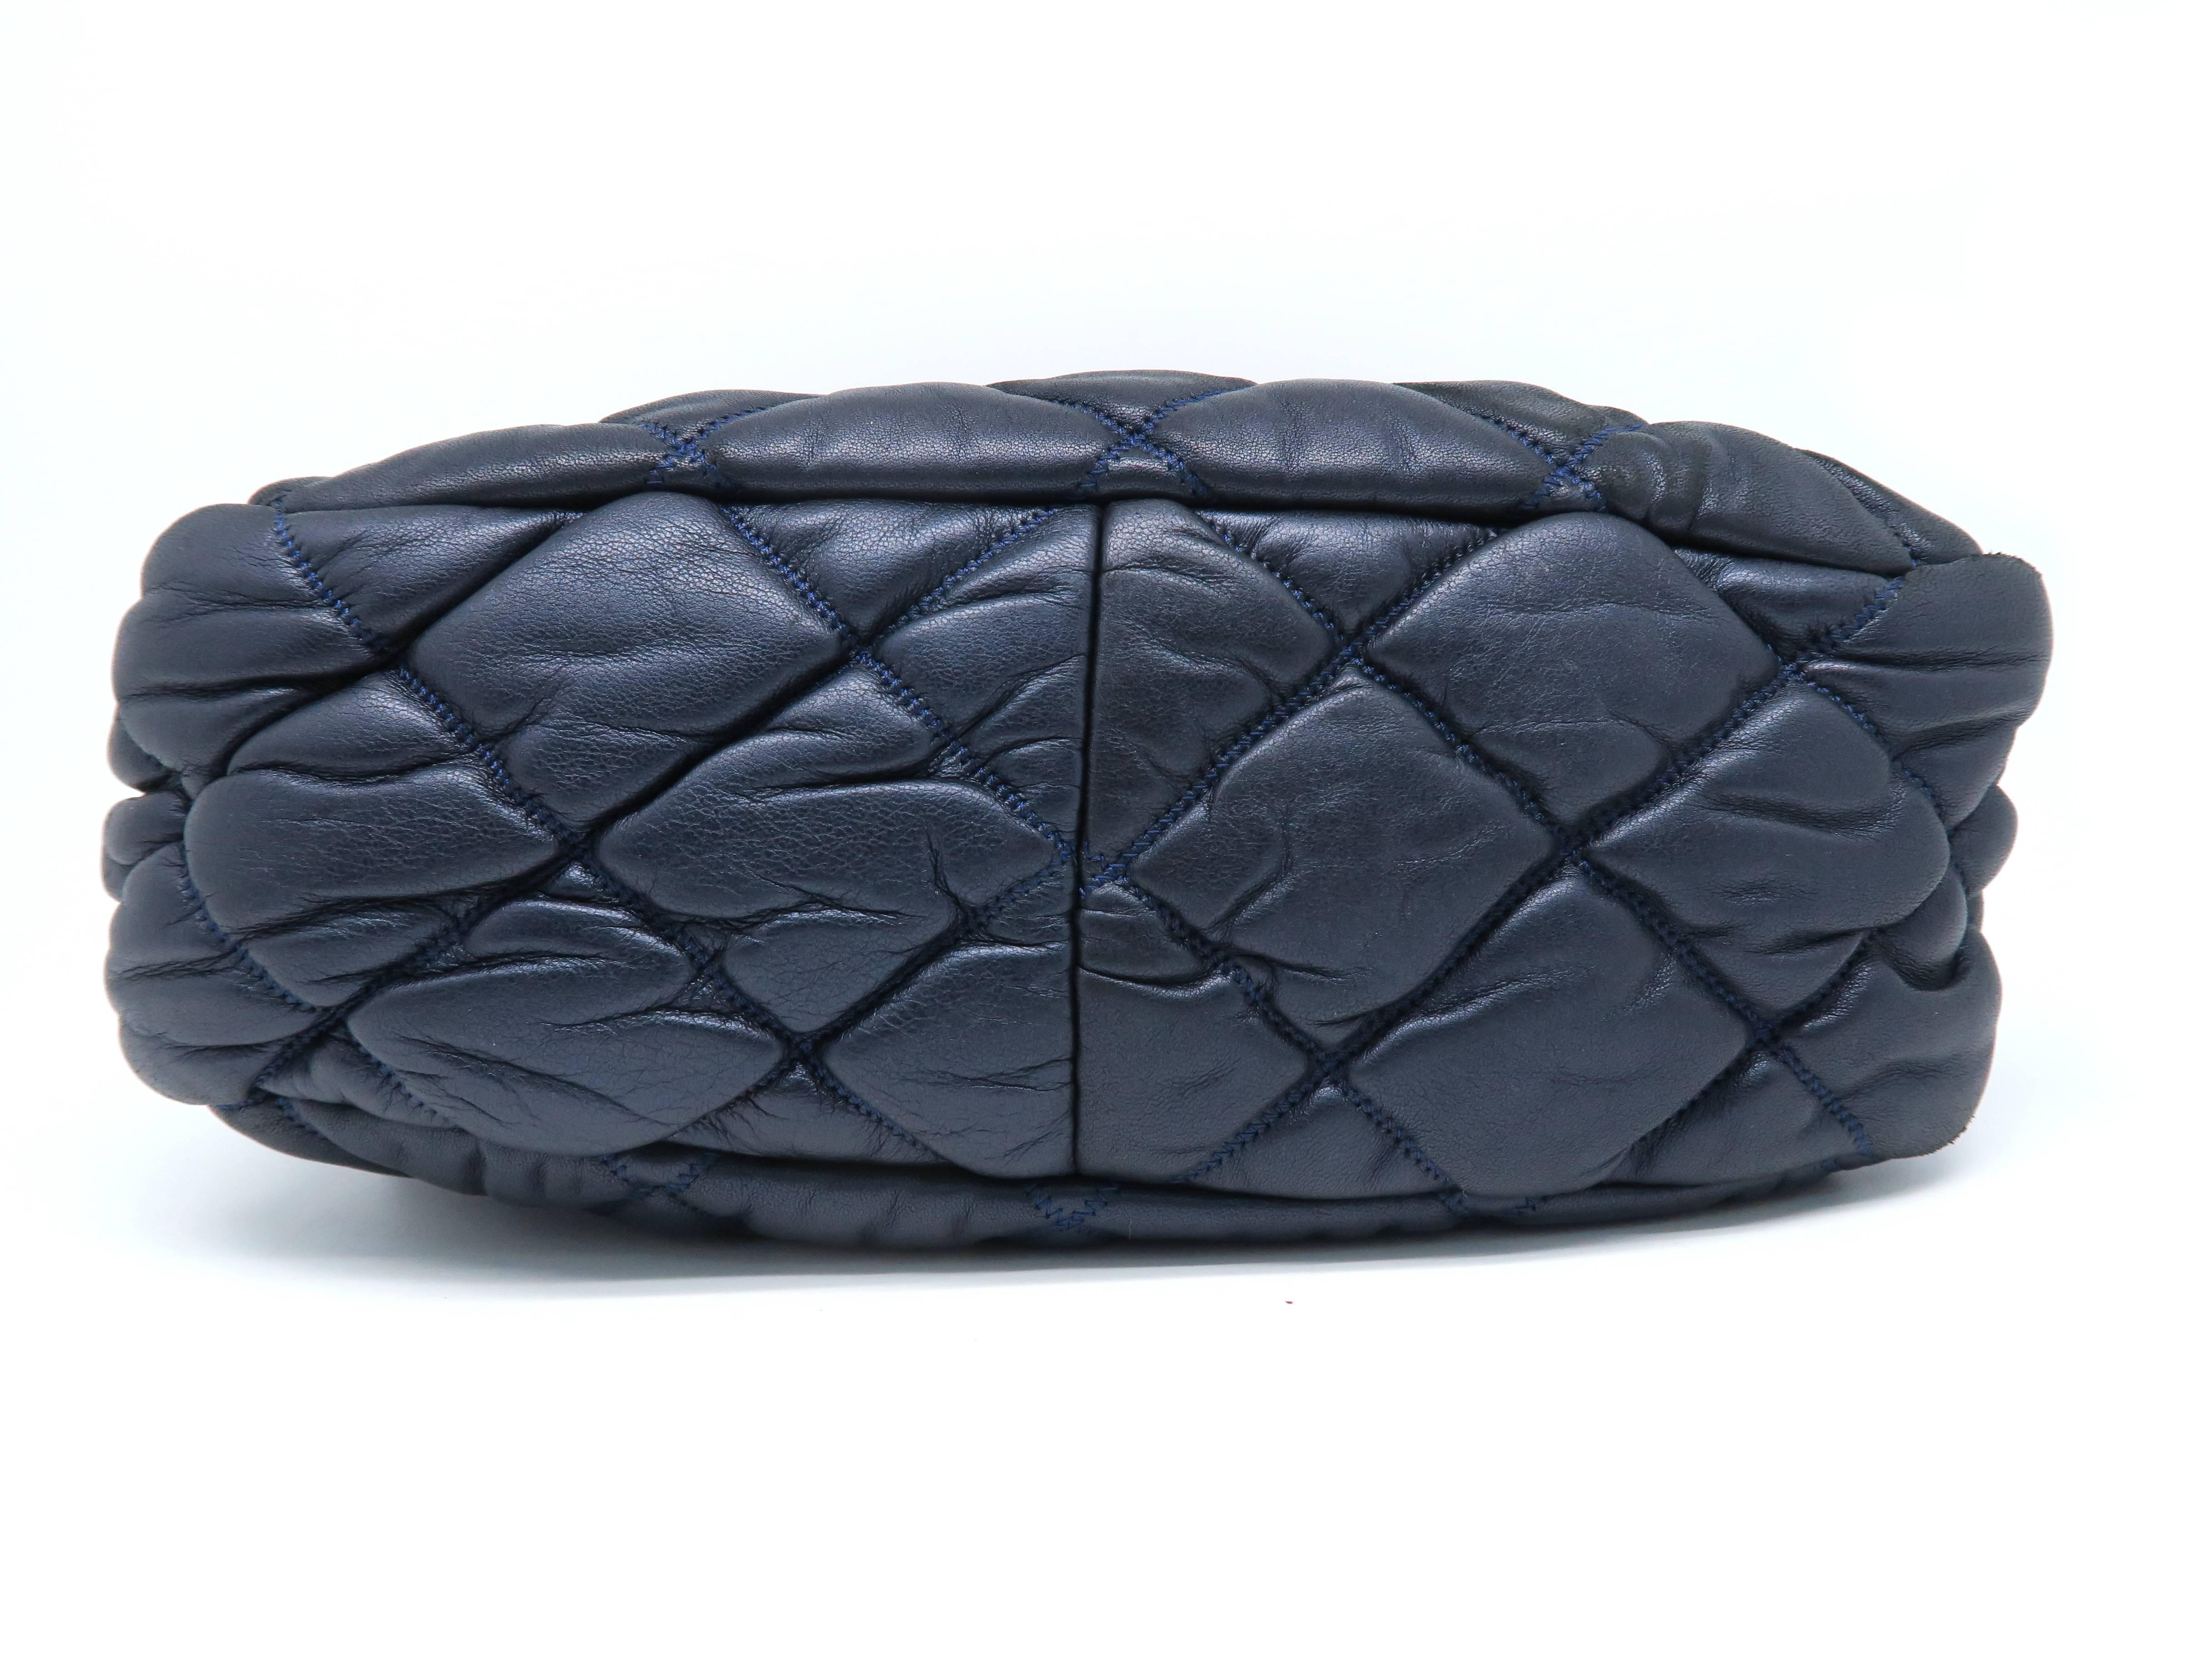 Chanel Dark Blue Quilting Lambskin Leather Chain Shoulder Bag In Excellent Condition For Sale In Kowloon, HK